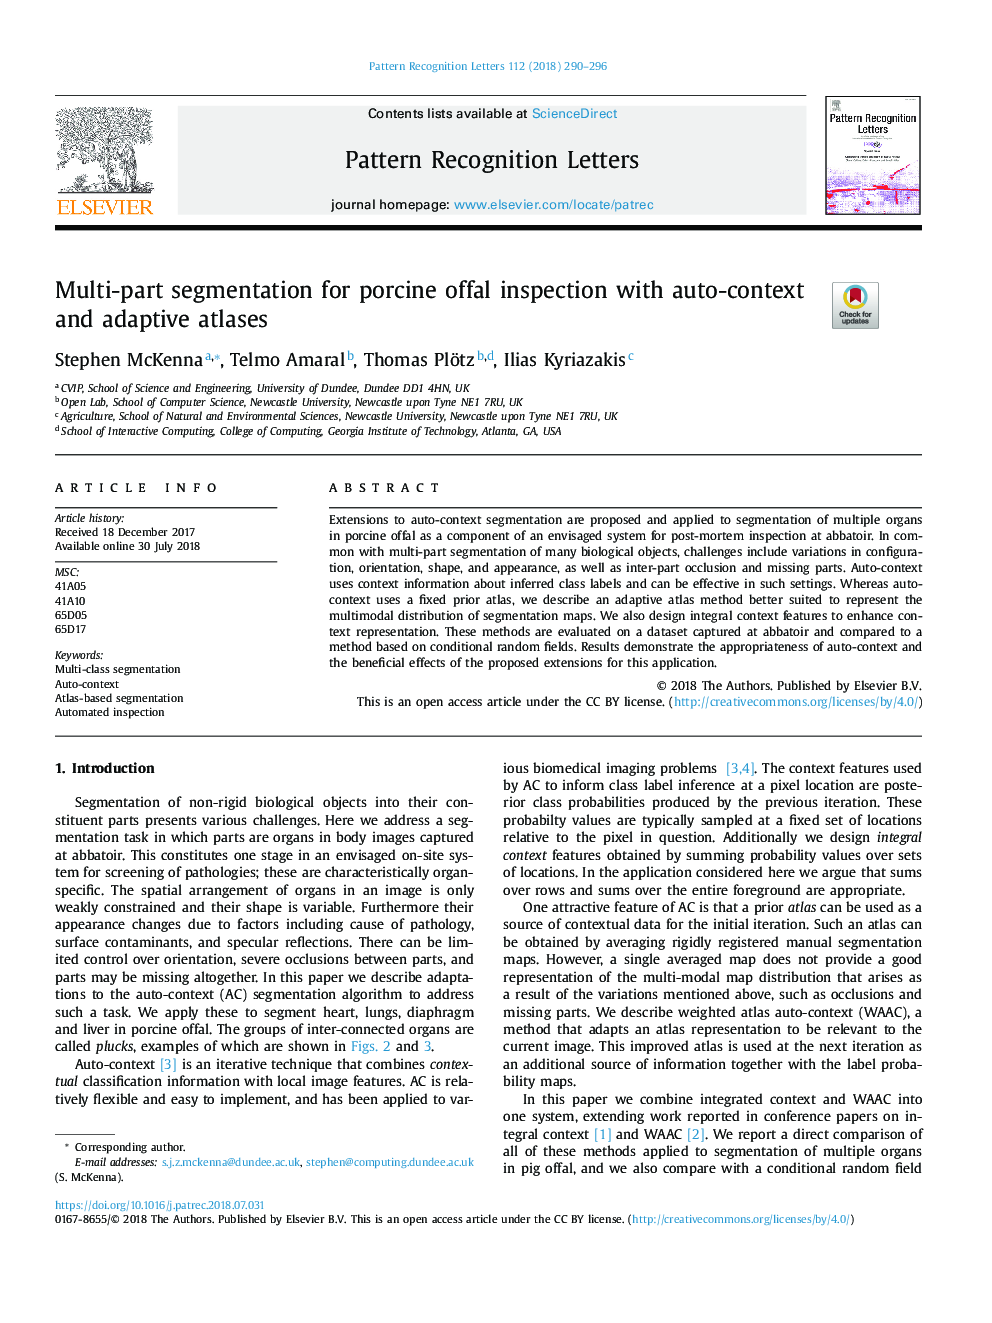 Multi-part segmentation for porcine offal inspection with auto-context and adaptive atlases